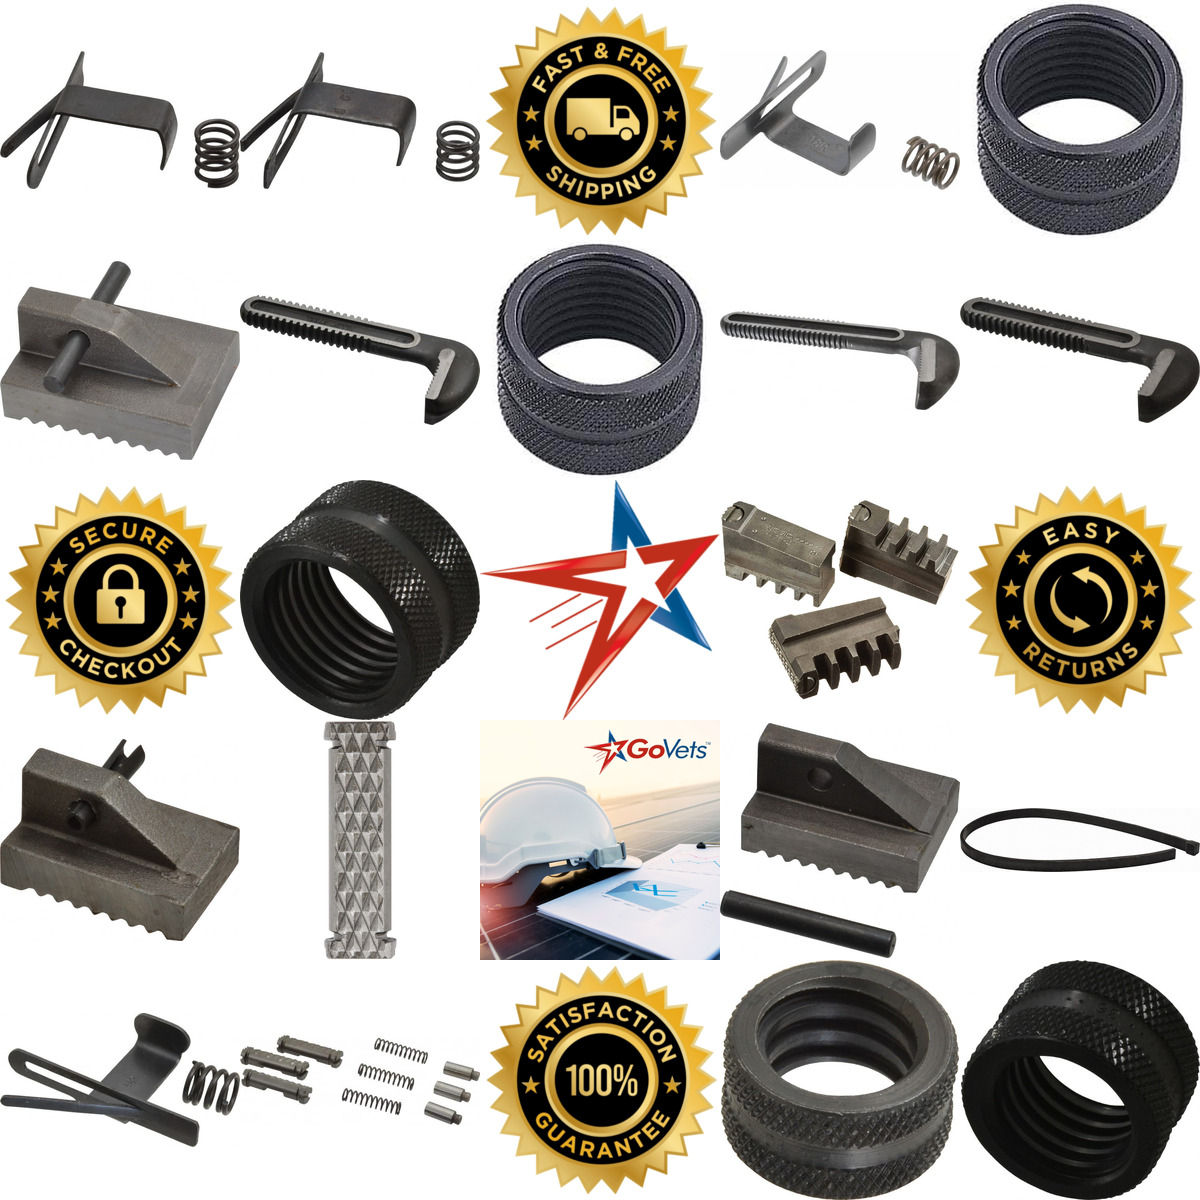 A selection of Pipe Wrench Accessories products on GoVets